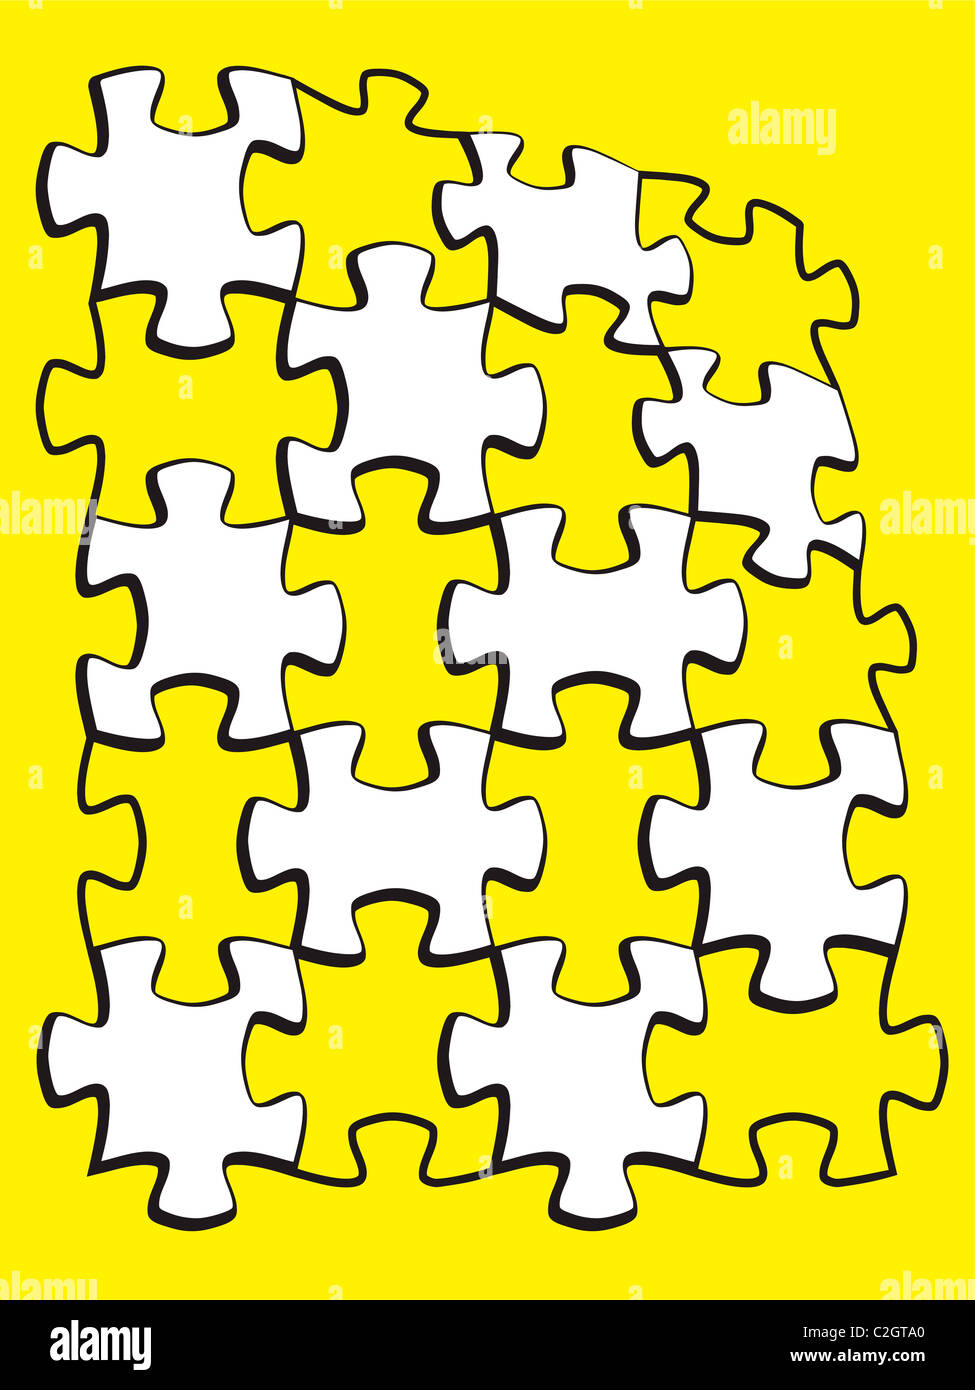 puzzle colored parts backgrounds. Stock Photo